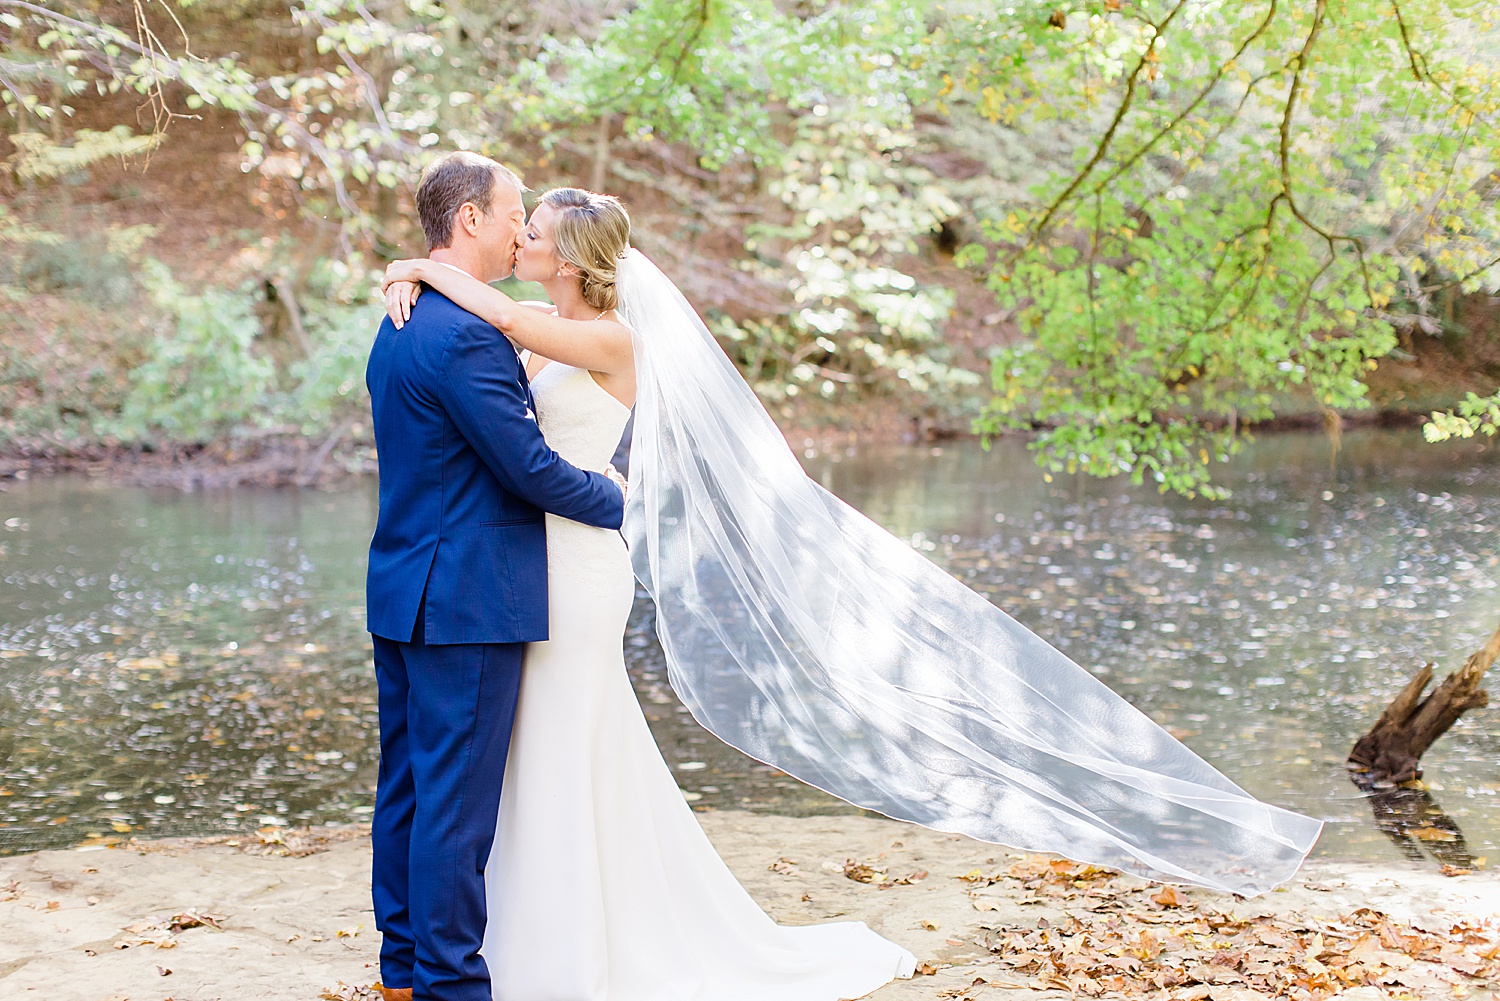 couple kisses while bride's veil is flutters in the wind